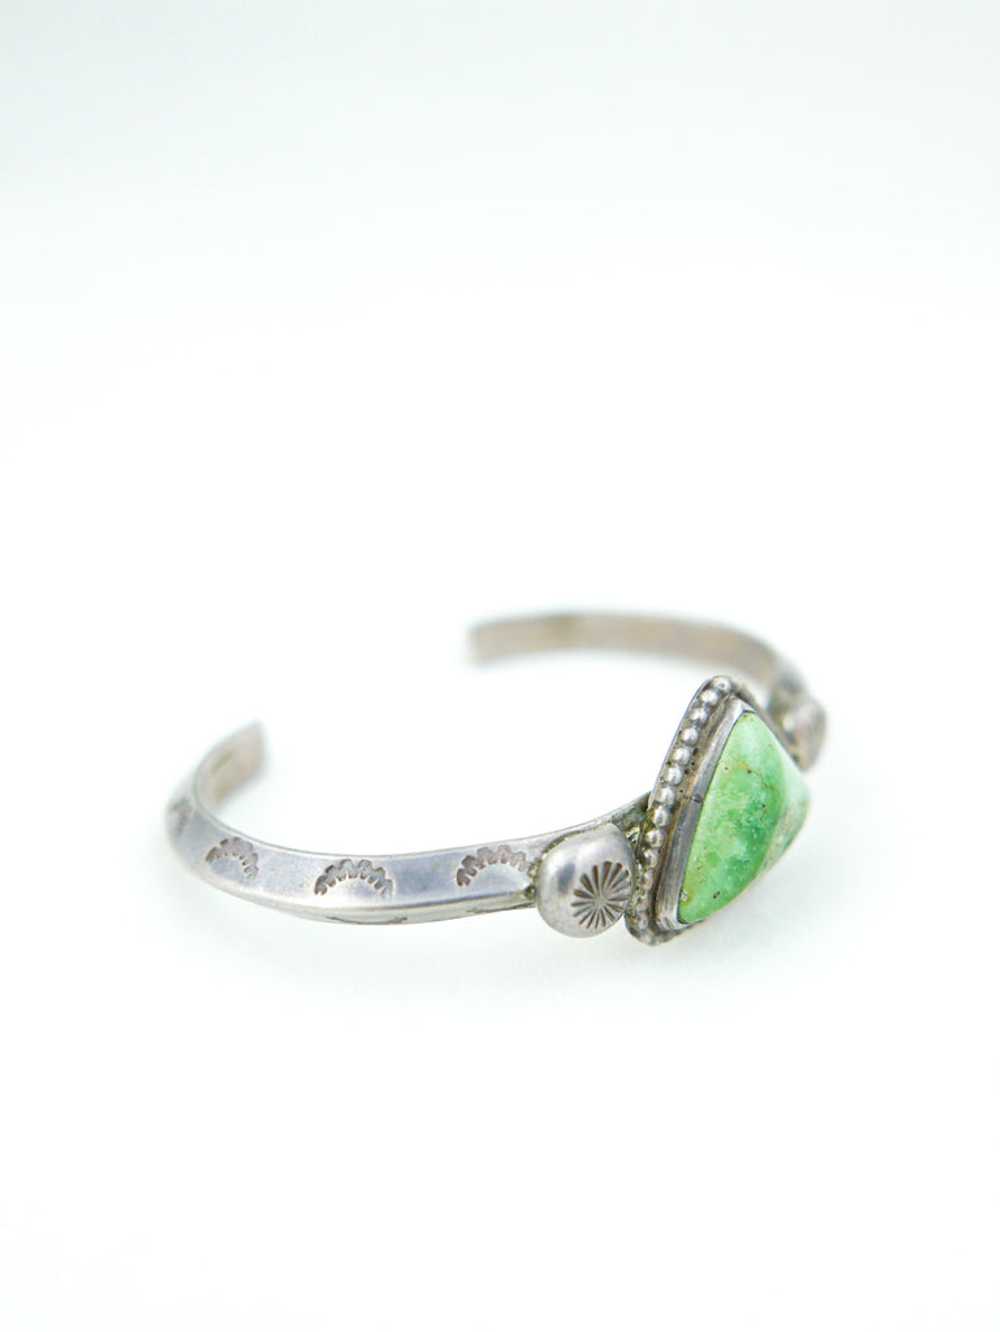 Green Turquoise Cuff - image 7